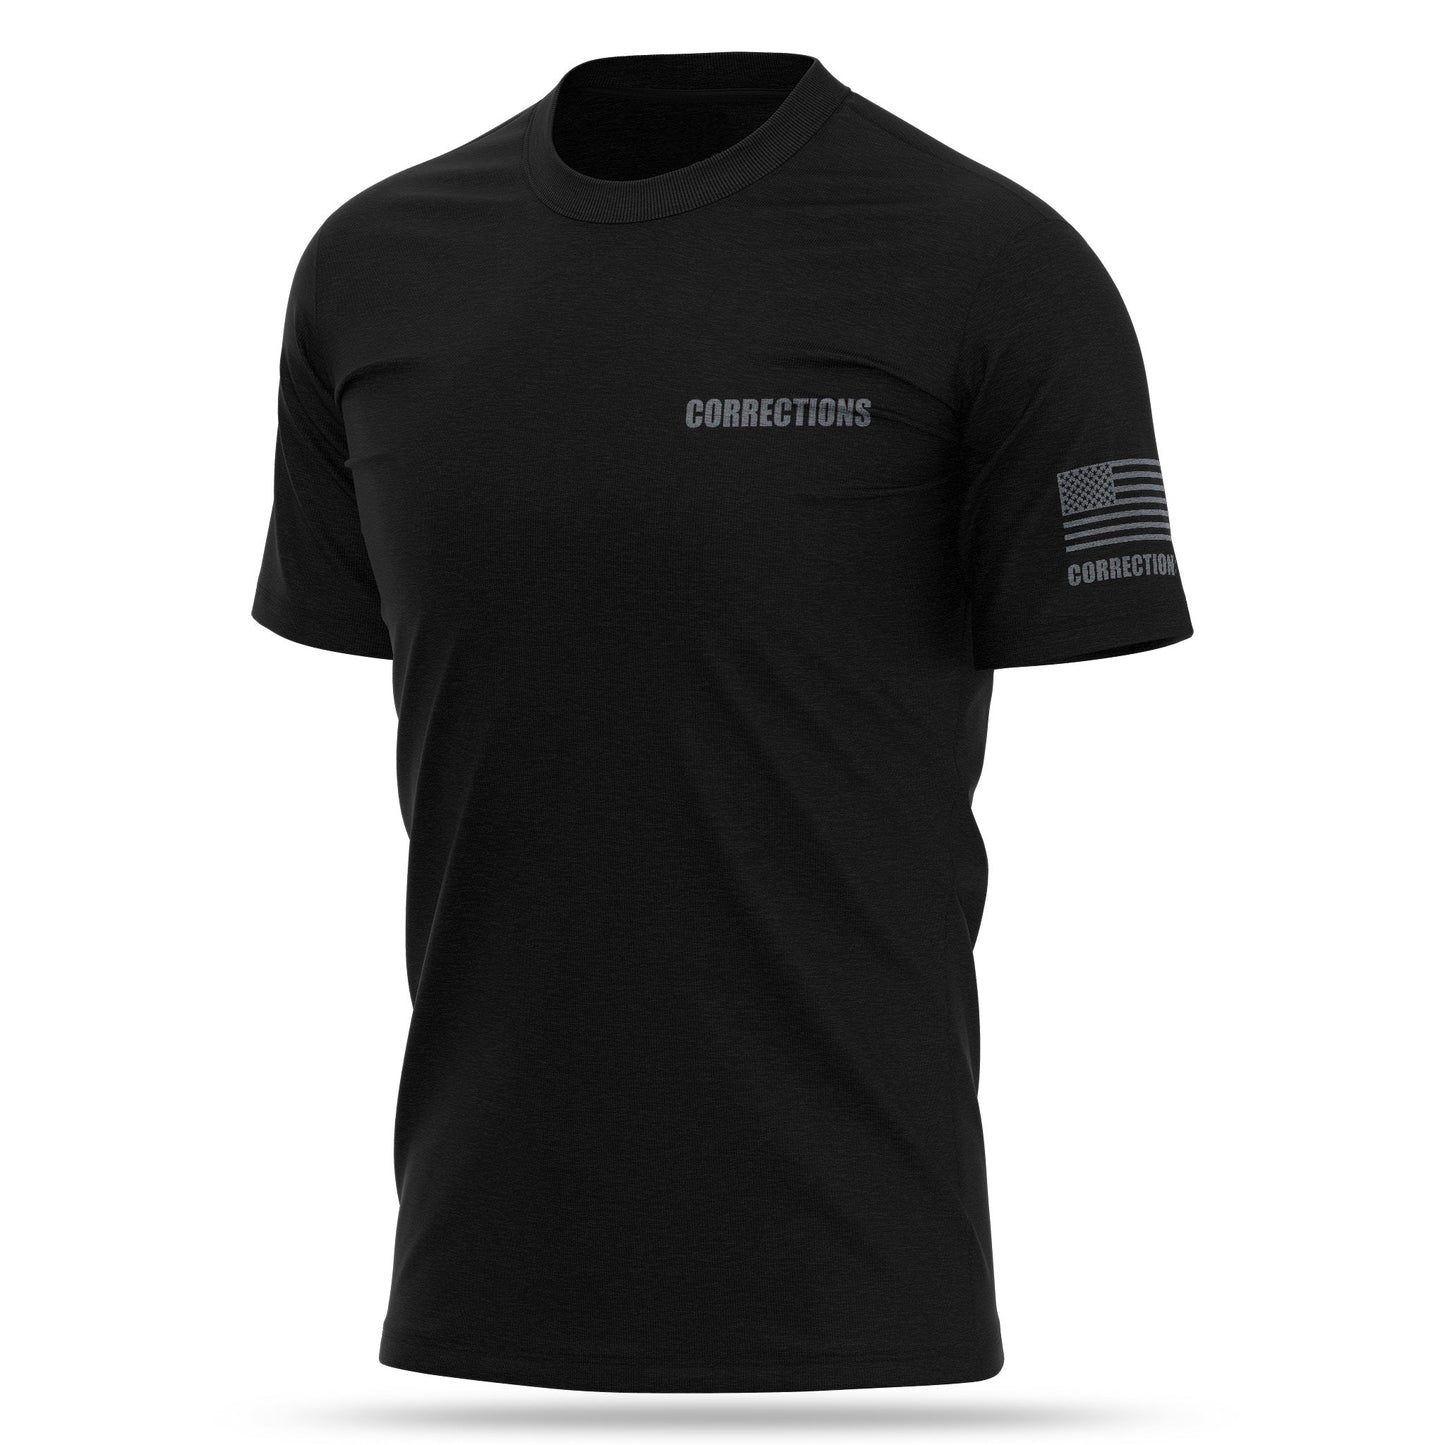 [CORRECTIONS] Men's Cotton Blend Shirt [BLK/GRY]-13 Fifty Apparel